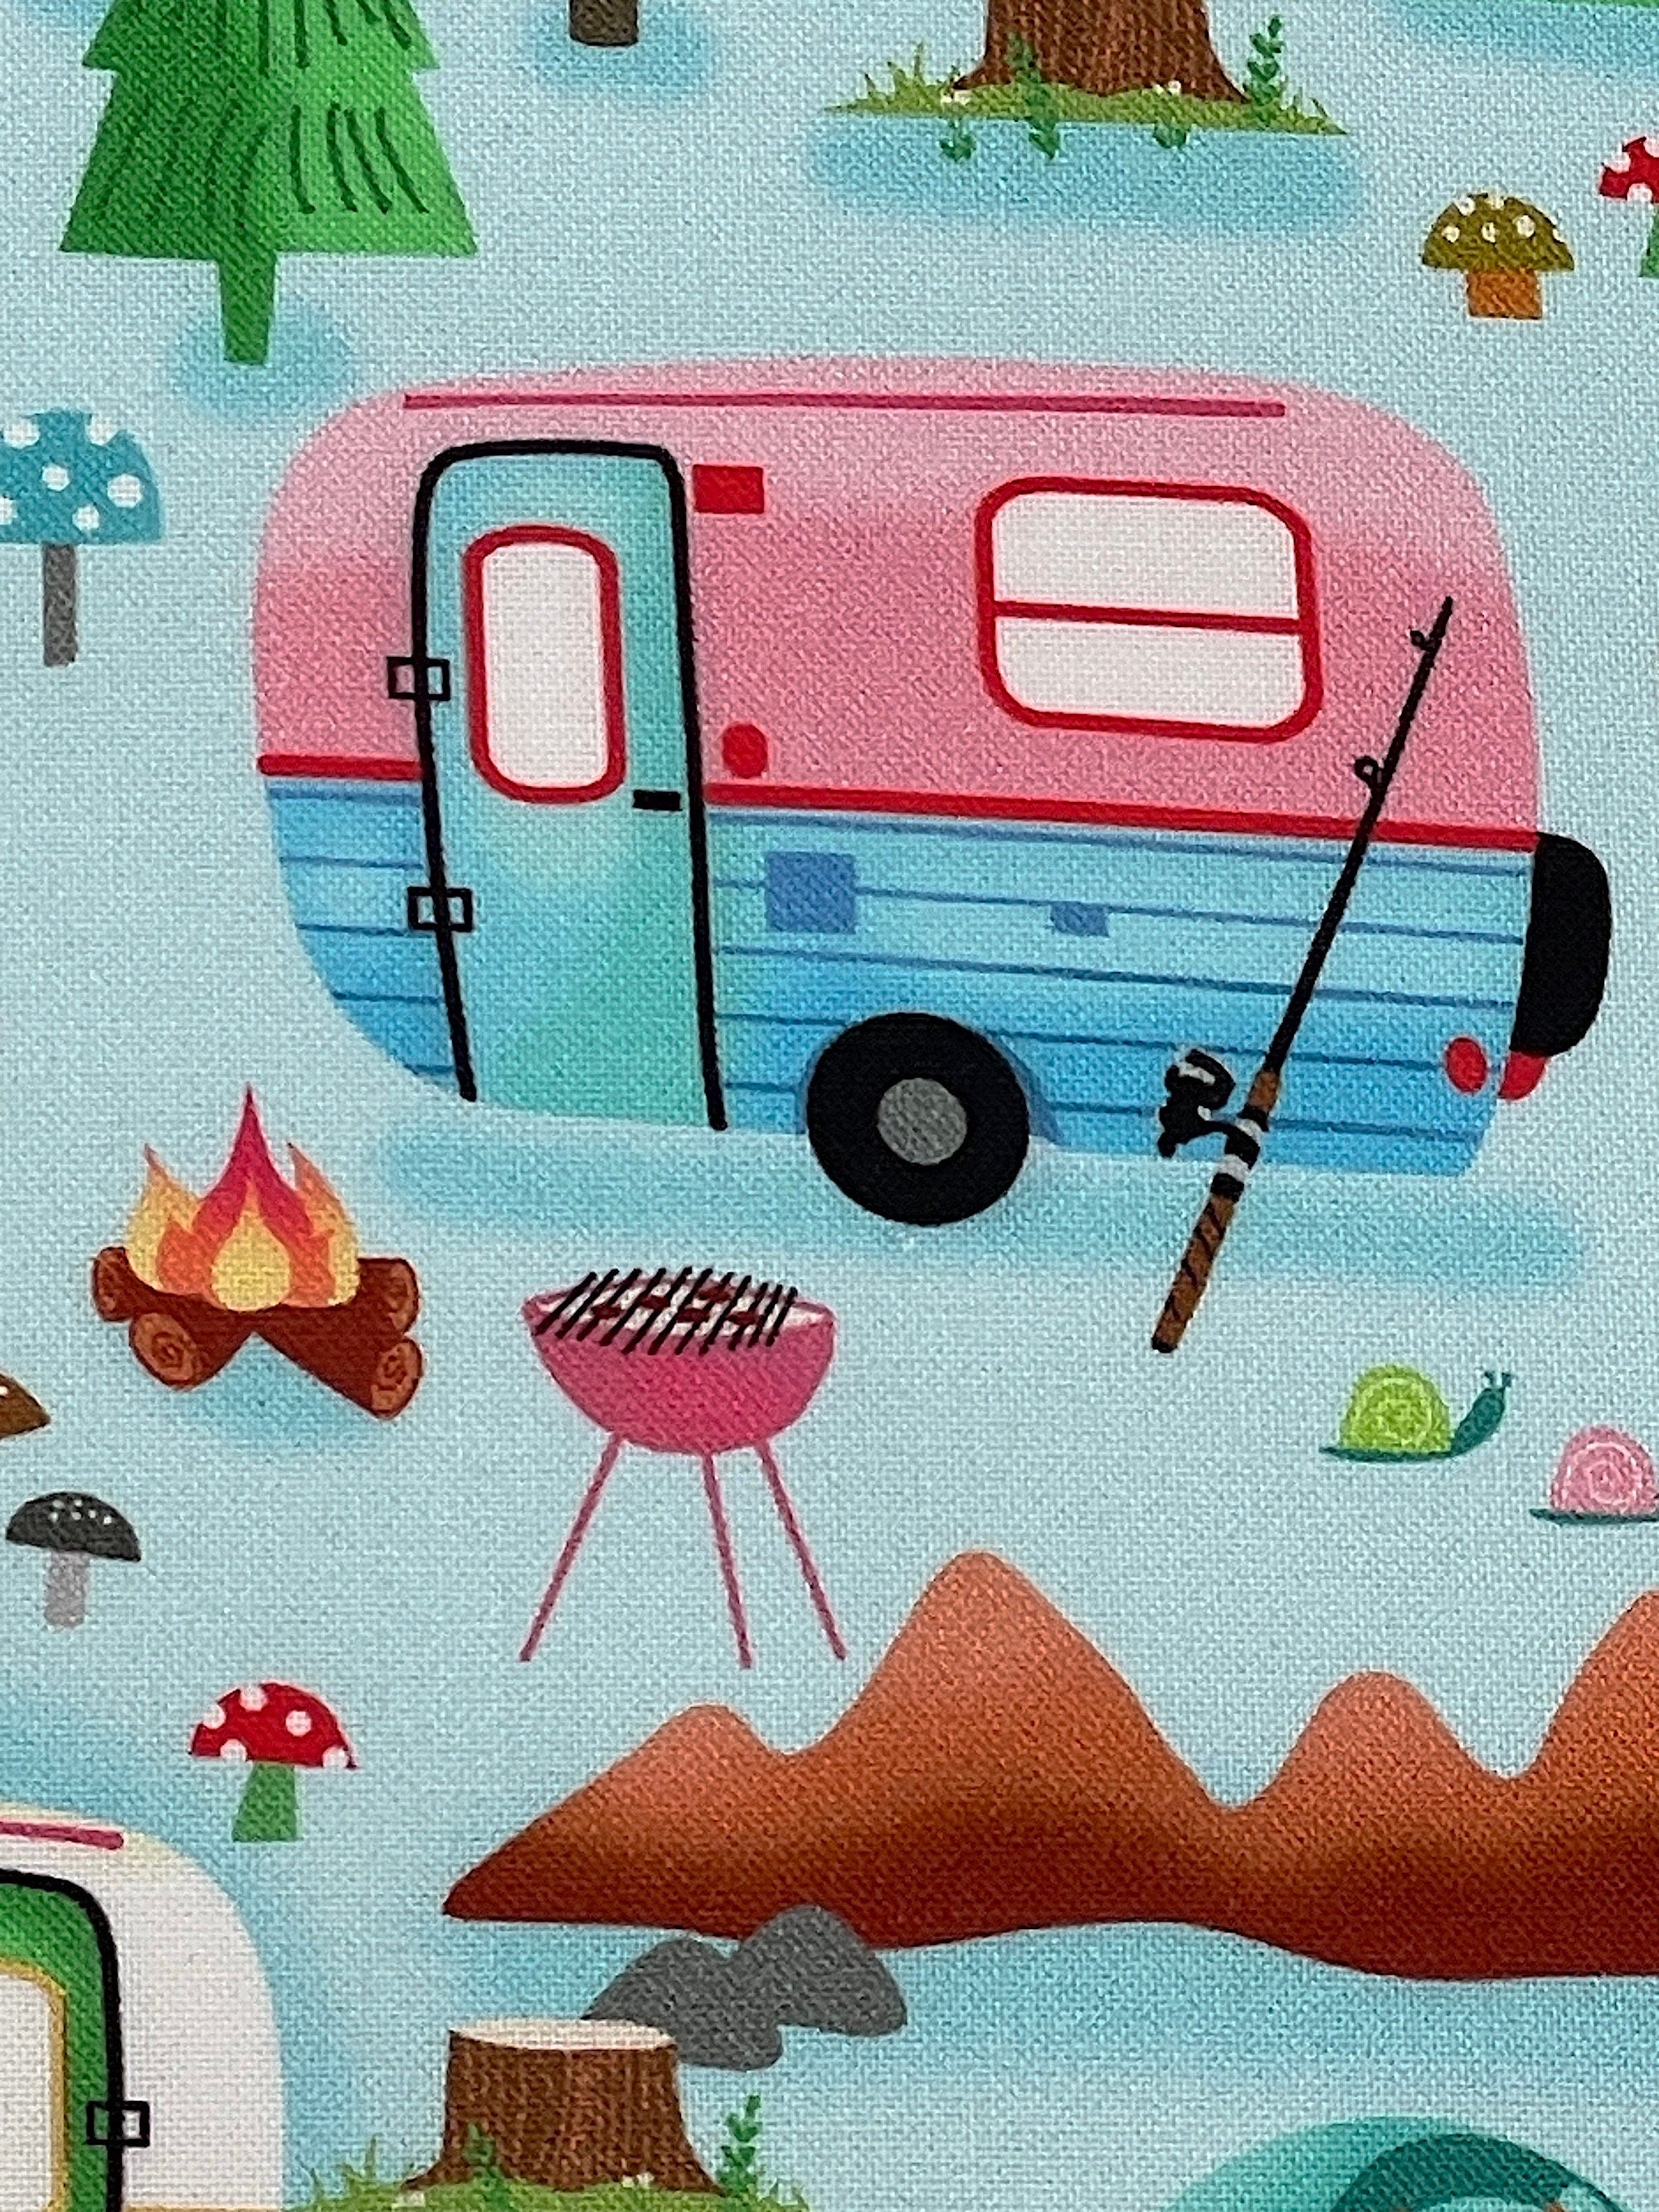 Close up of a pink, red and blue travel trailer with a fishing pole laying against it.